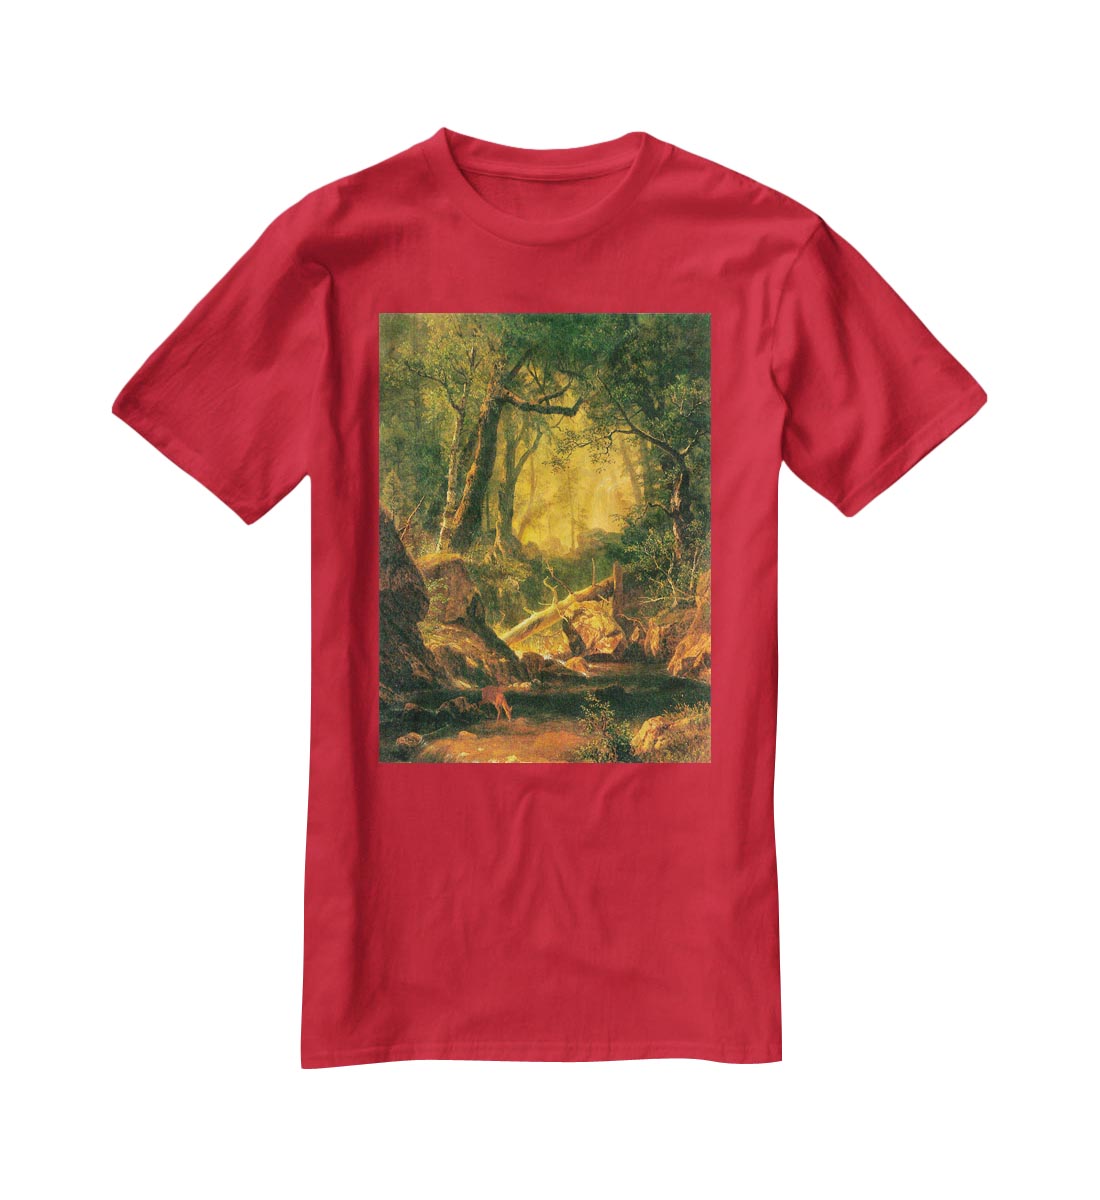 White Mountains New Hampshire 2 by Bierstadt T-Shirt - Canvas Art Rocks - 4